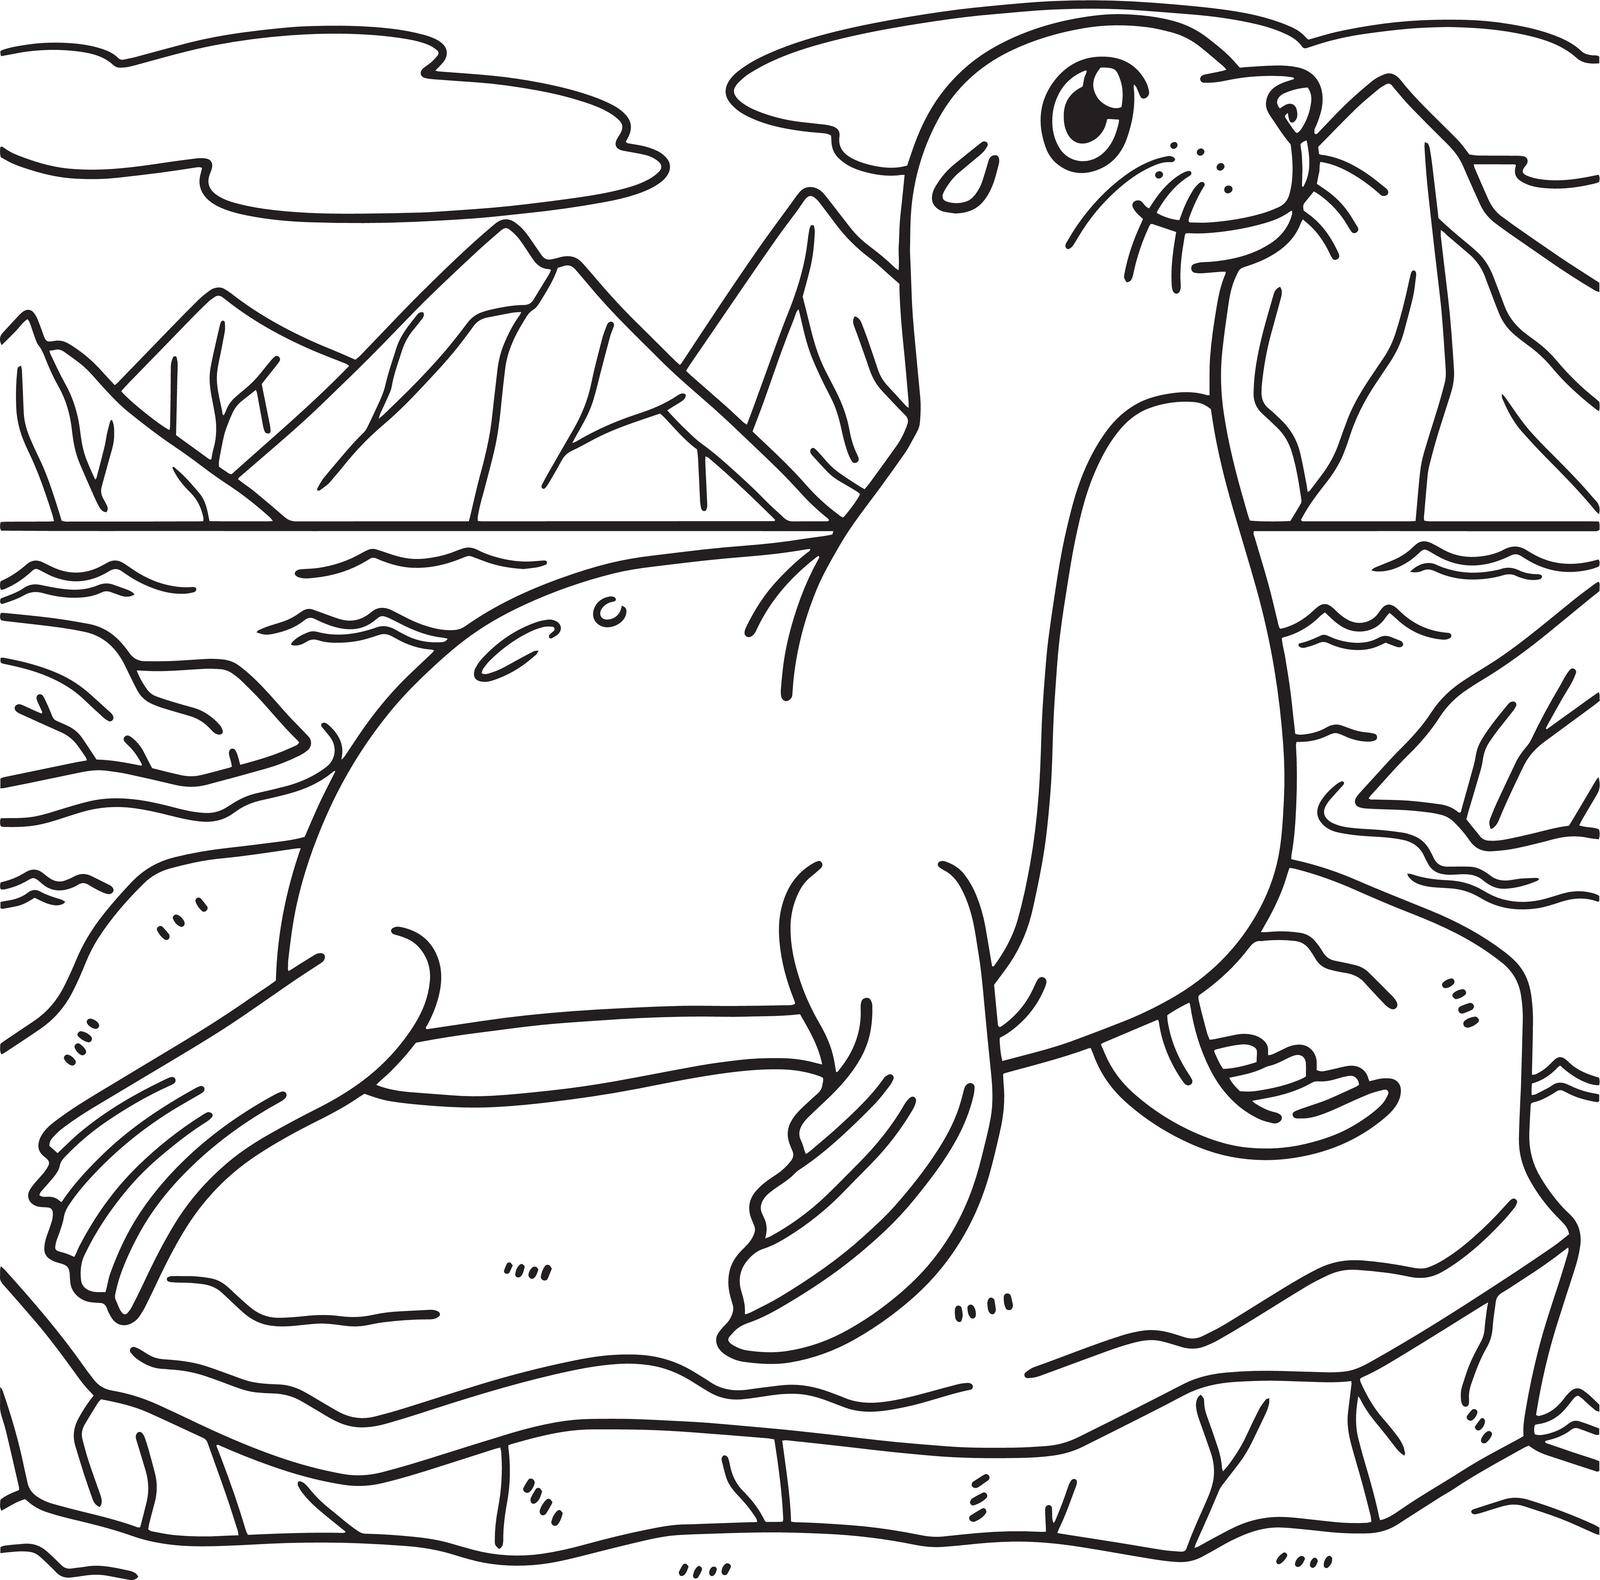 Seal Coloring Page for Kids by abbydesign